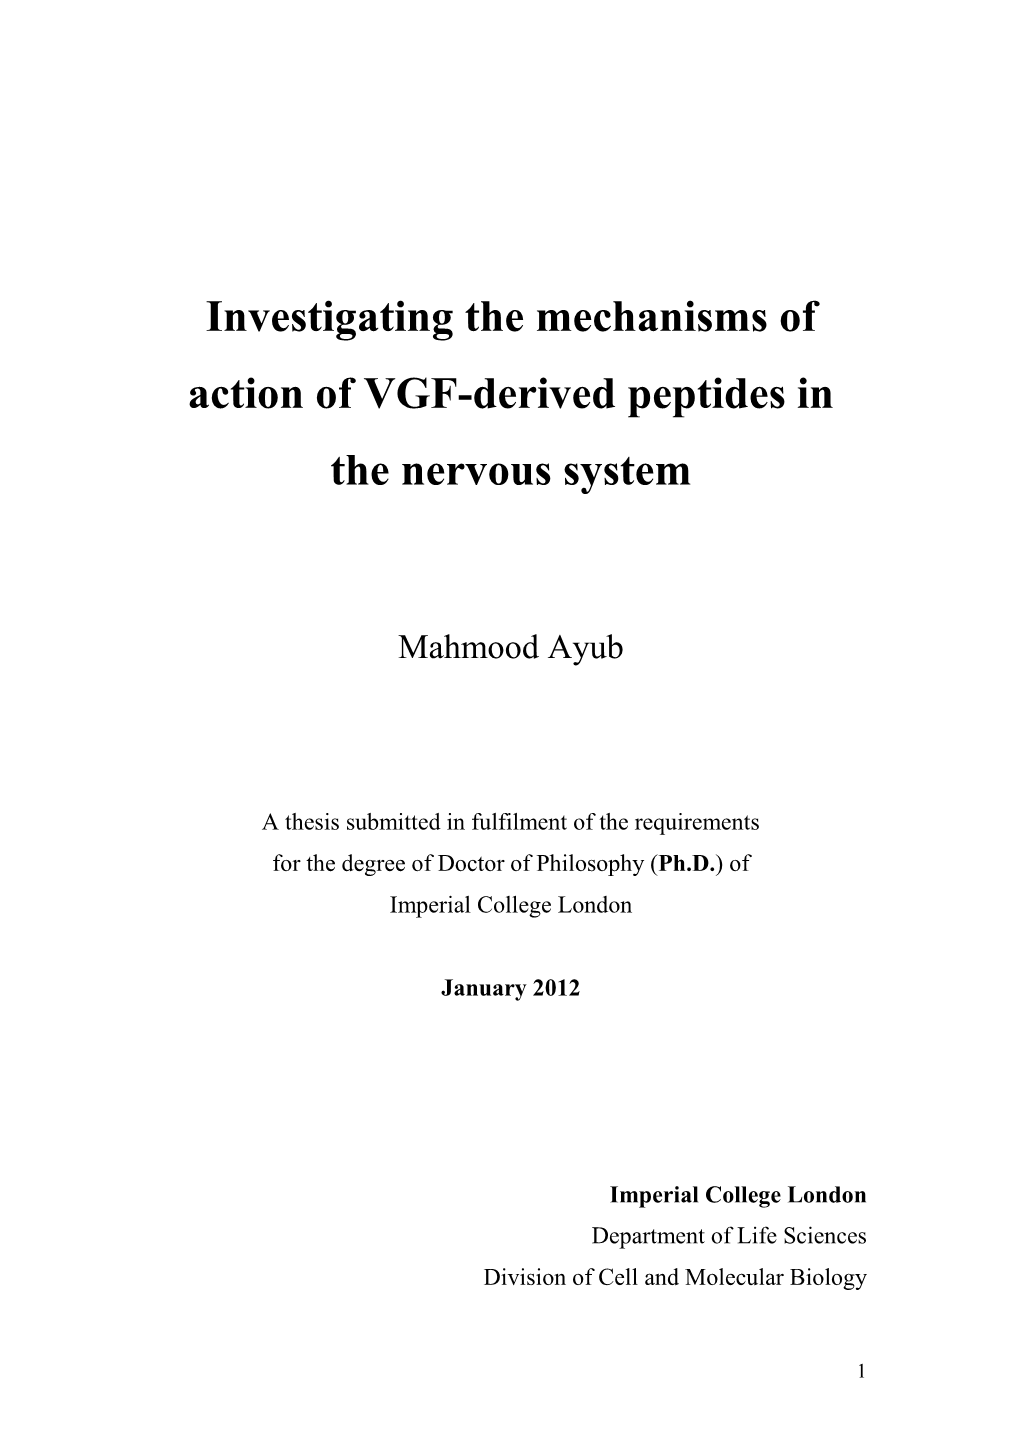 Investigating the Mechanisms of Action of VGF-Derived Peptides in the Nervous System